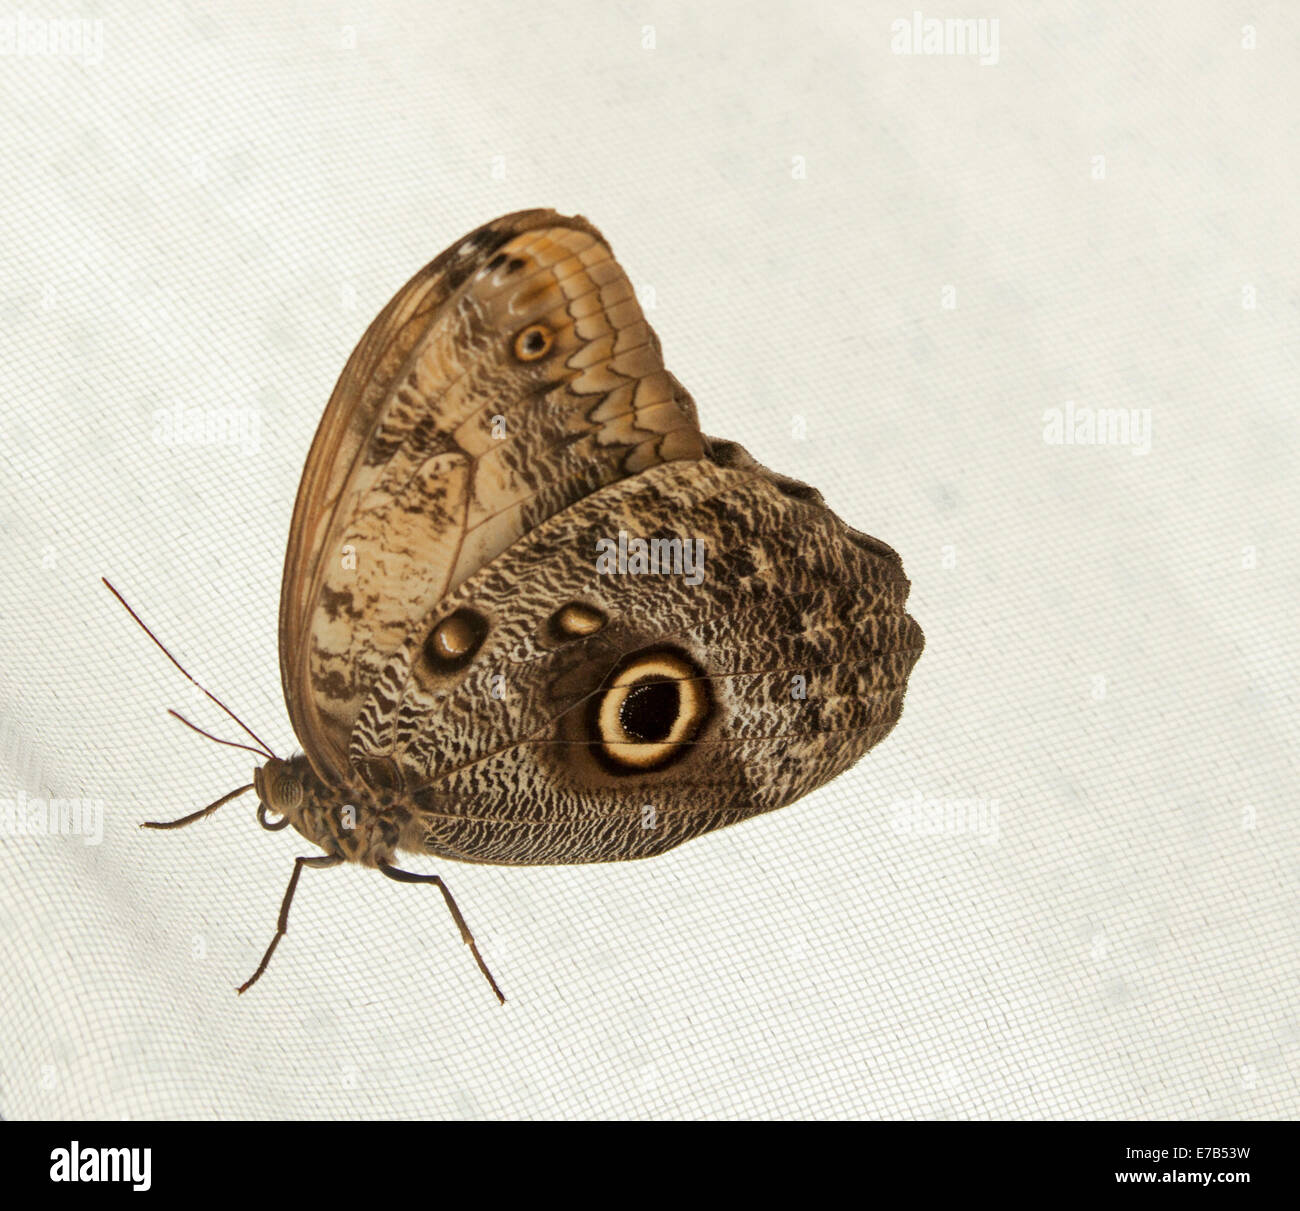 Brown owl butterfly on white background, intricate pattern and dark eye spots on wings, Caligo memnon, Mexico and Costa Rica. Stock Photo